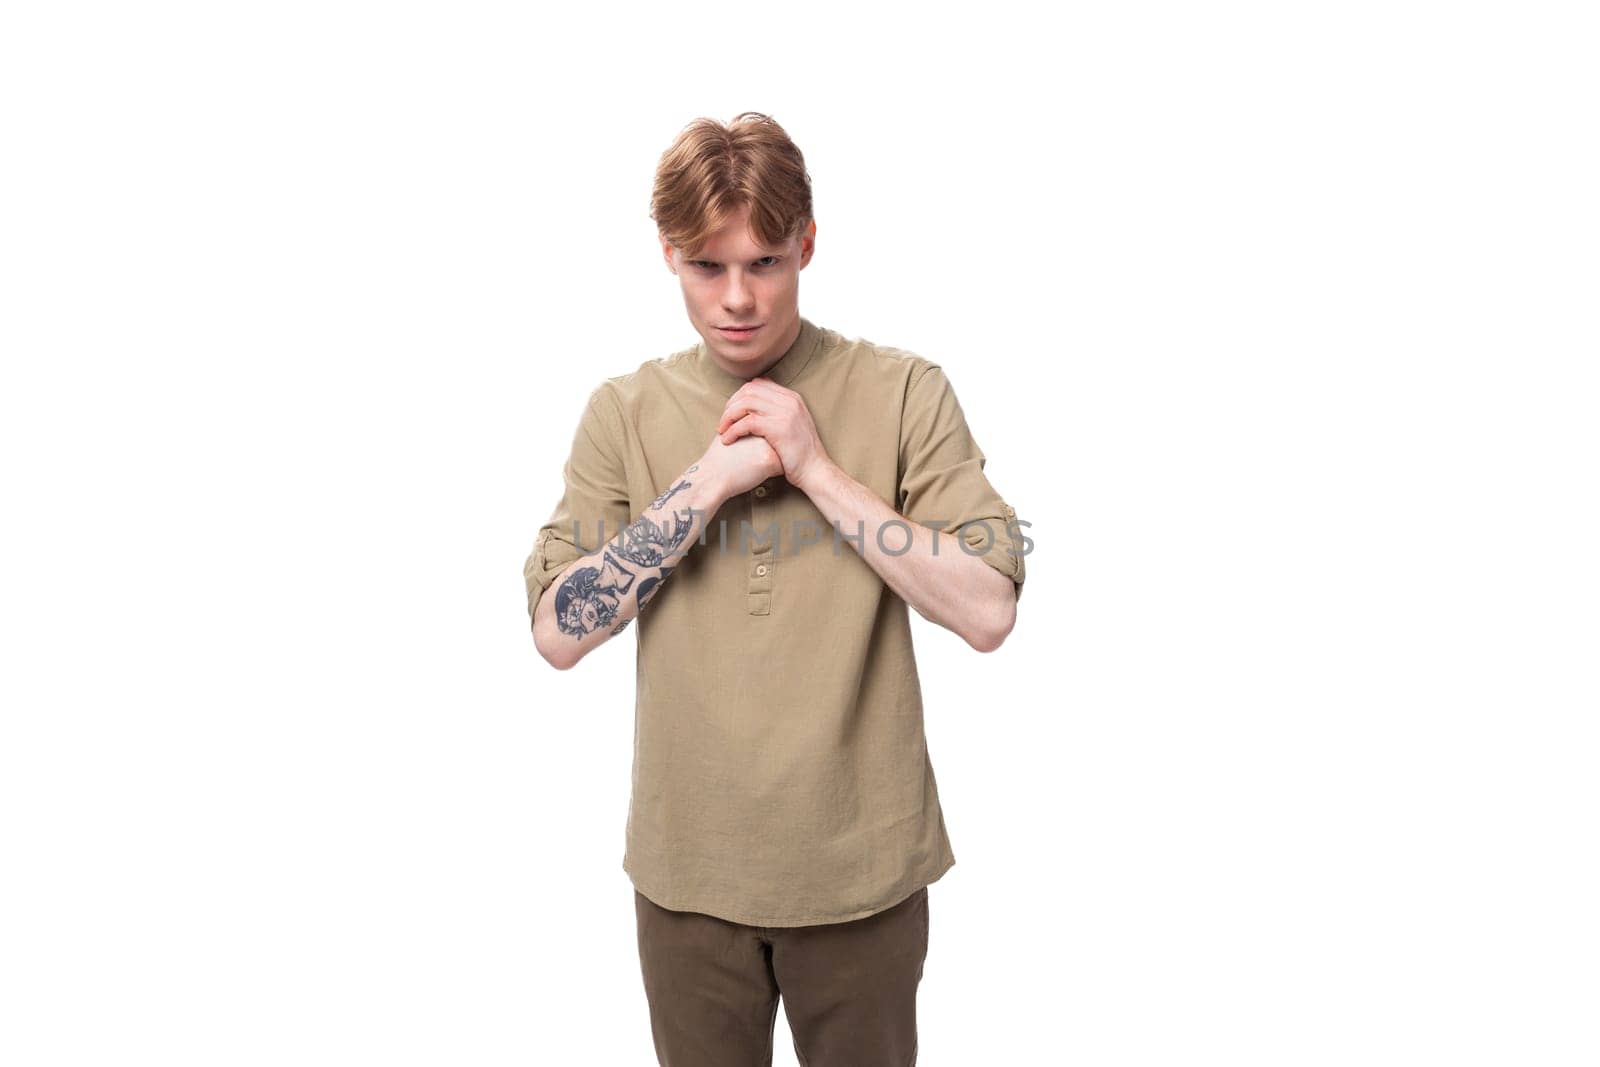 young european man with red golden hair is dressed in a light brown shirt on a white background.